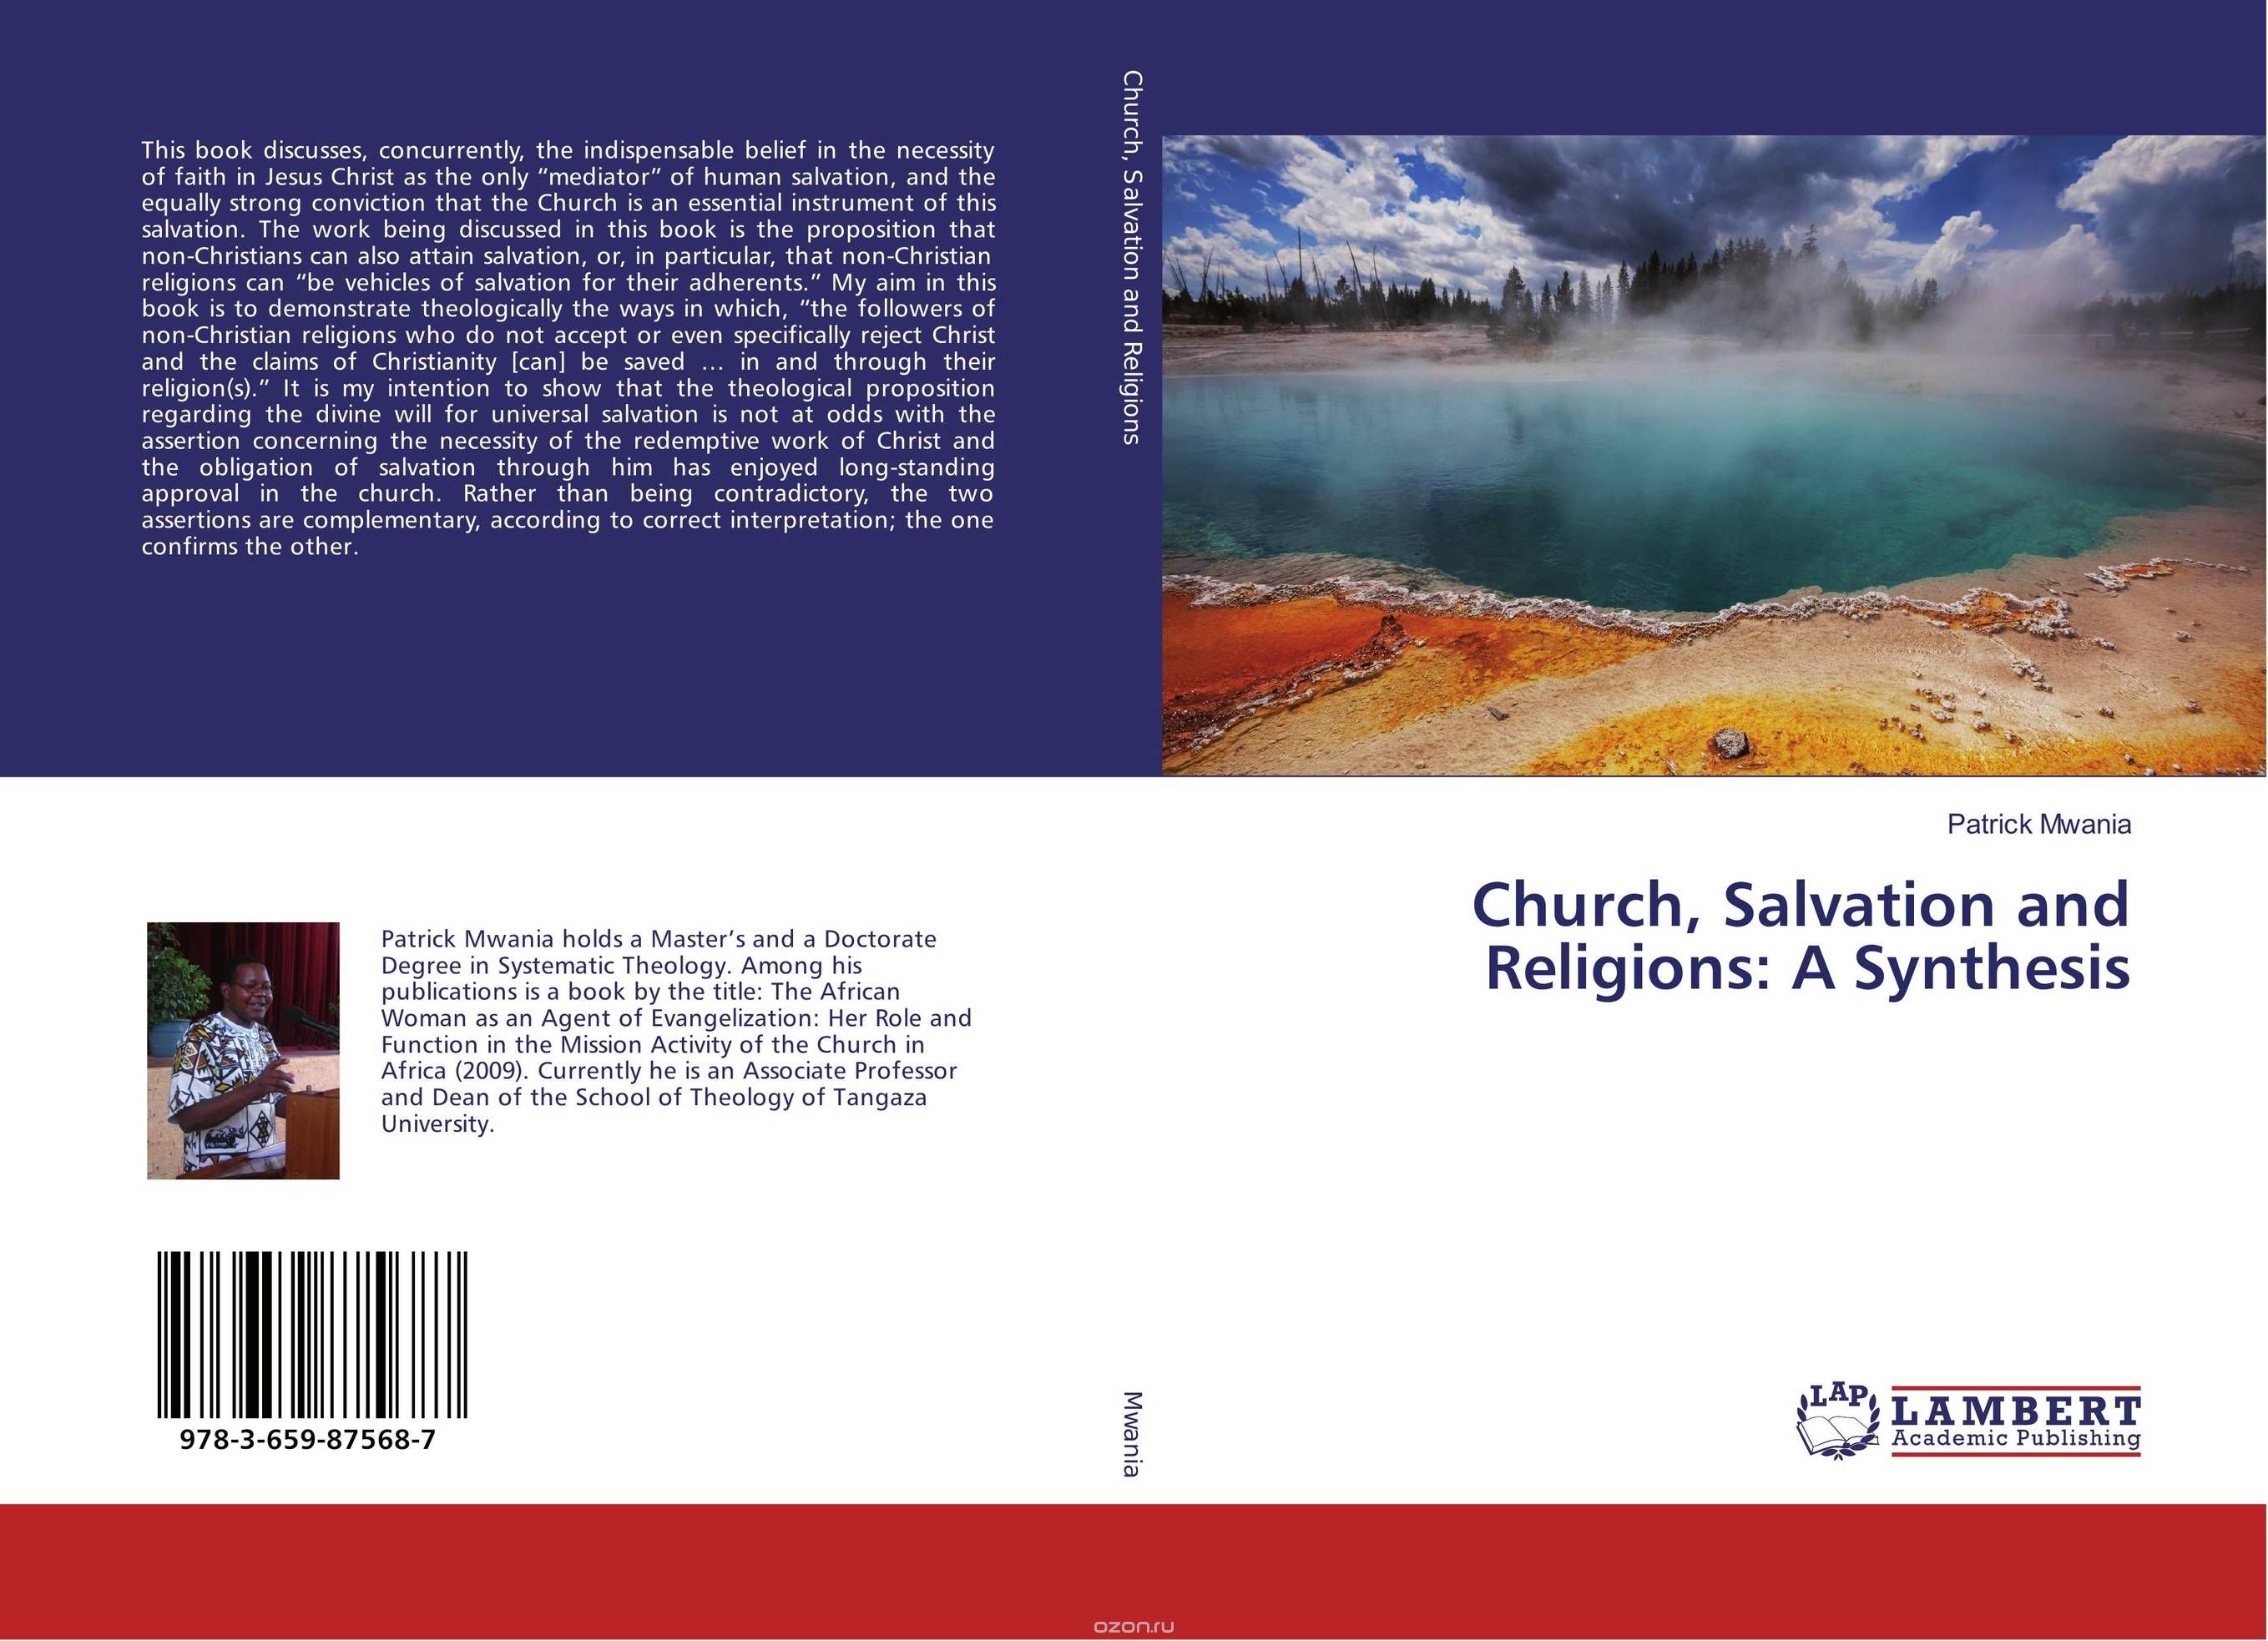 Church, Salvation and Religions: A Synthesis